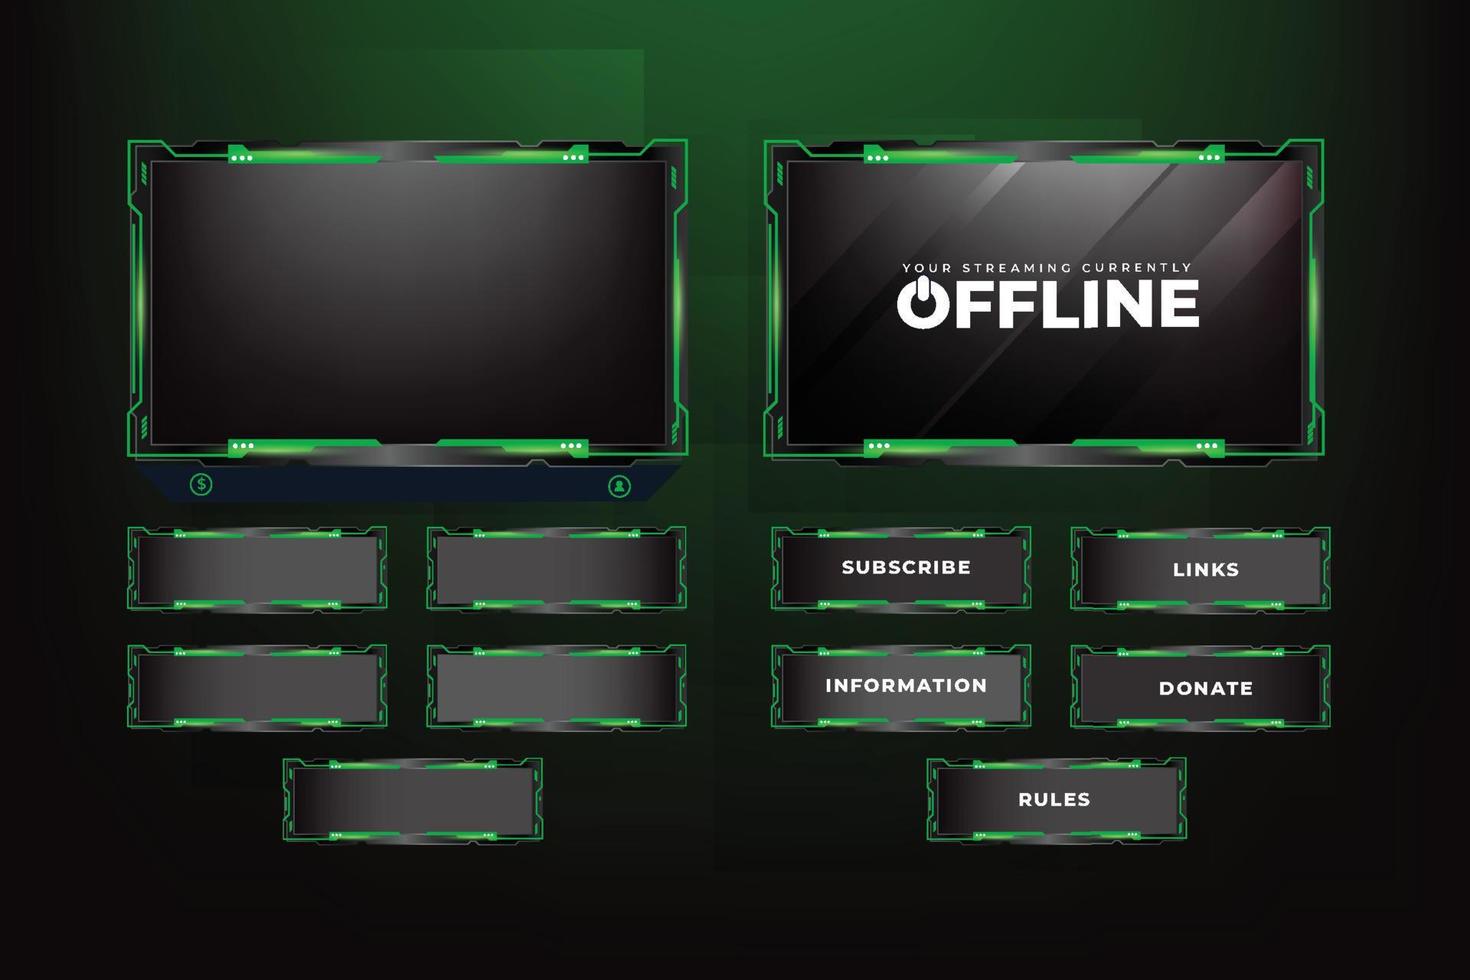 Gaming screen overlay decoration with futuristic shapes and dark color. Live gaming overlay design with buttons and screen panels. Live streaming overlay vector with green color for online gamers.